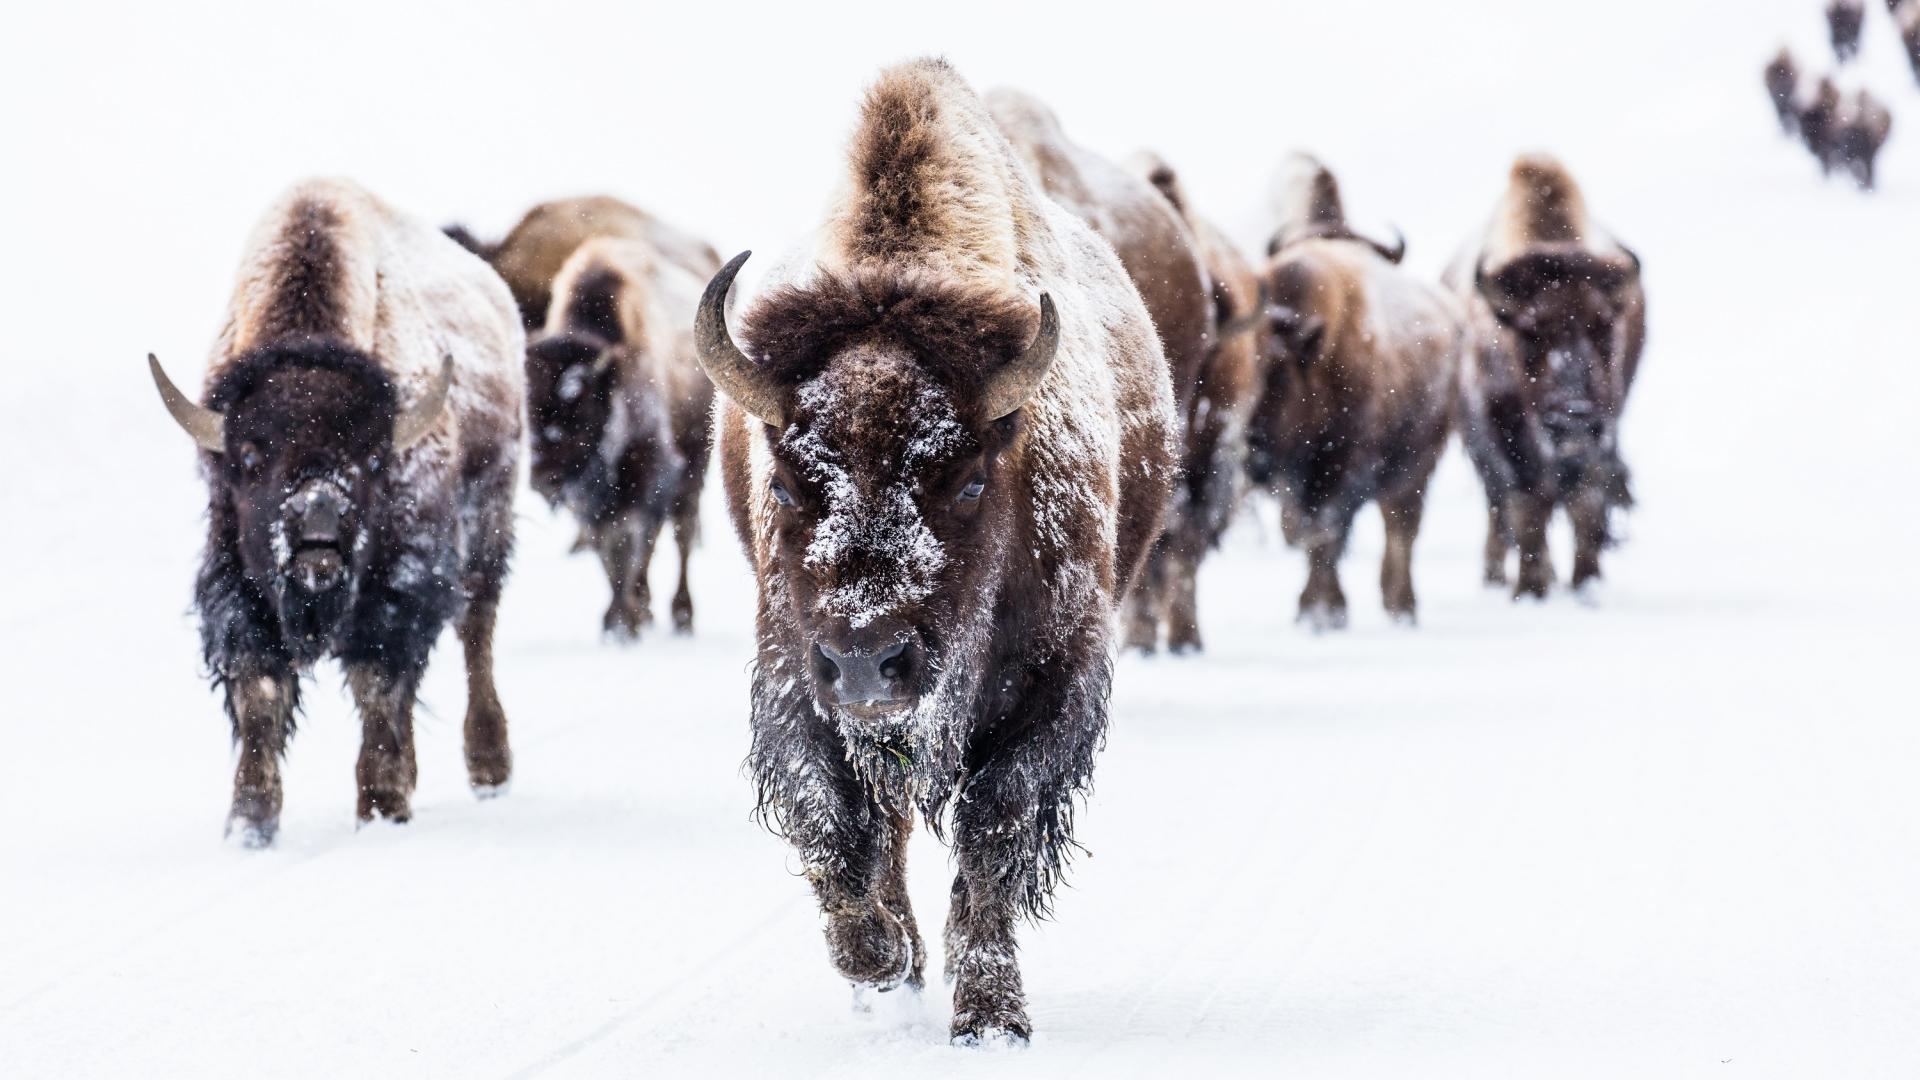 Best adventure holidays | Bison in Yellowstone National Park